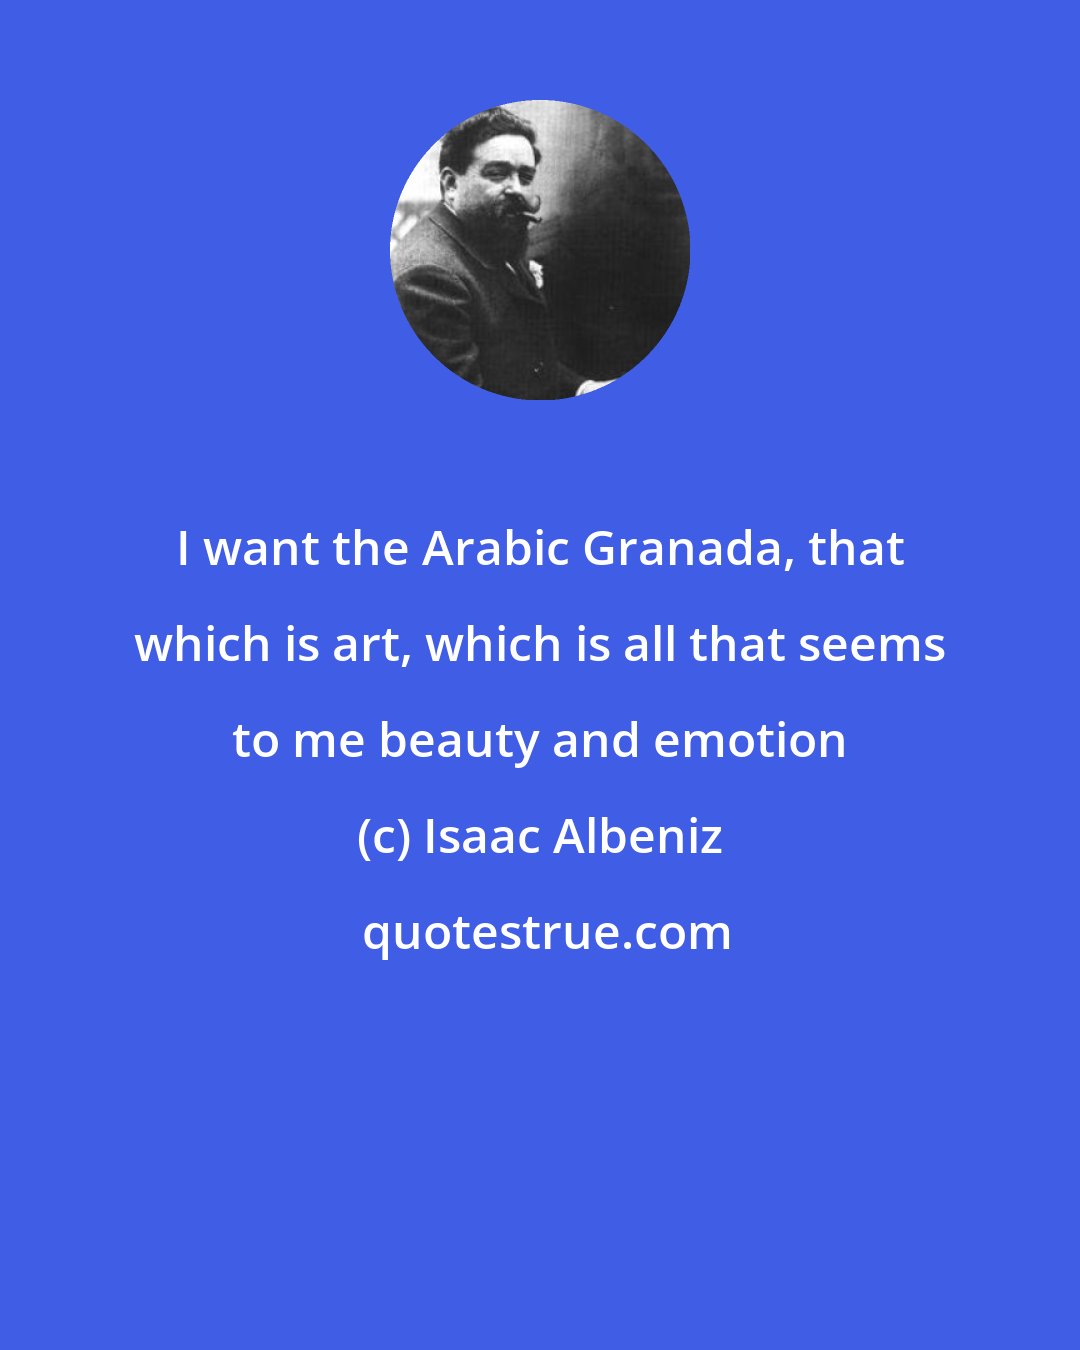 Isaac Albeniz: I want the Arabic Granada, that which is art, which is all that seems to me beauty and emotion